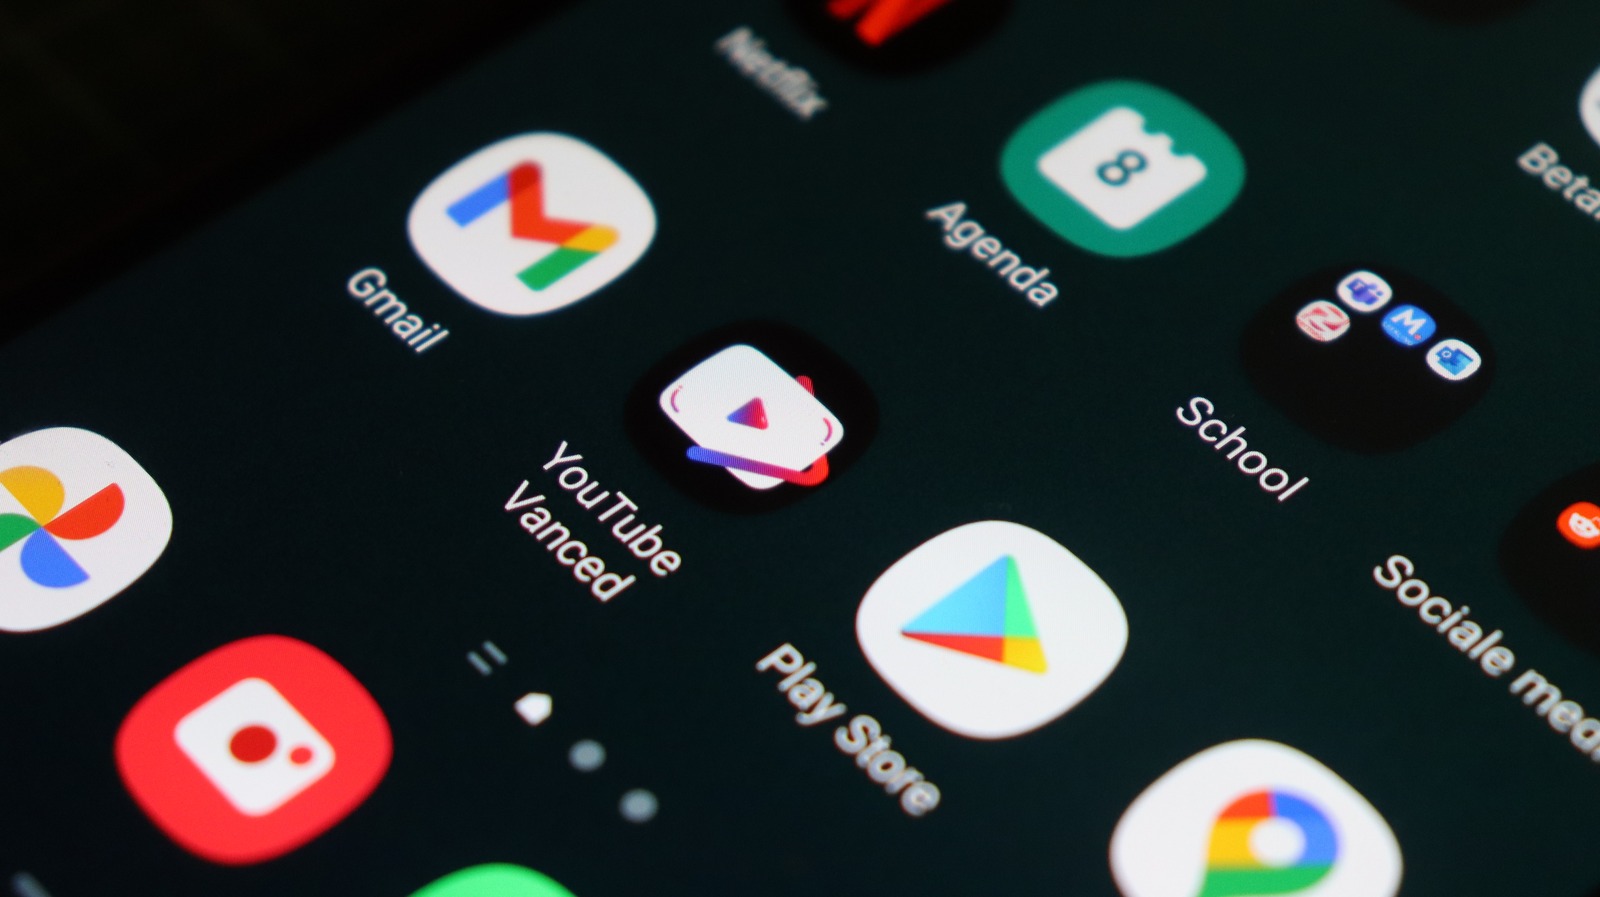 5-kinds-of-android-apps-you-need-to-stop-using-right-now